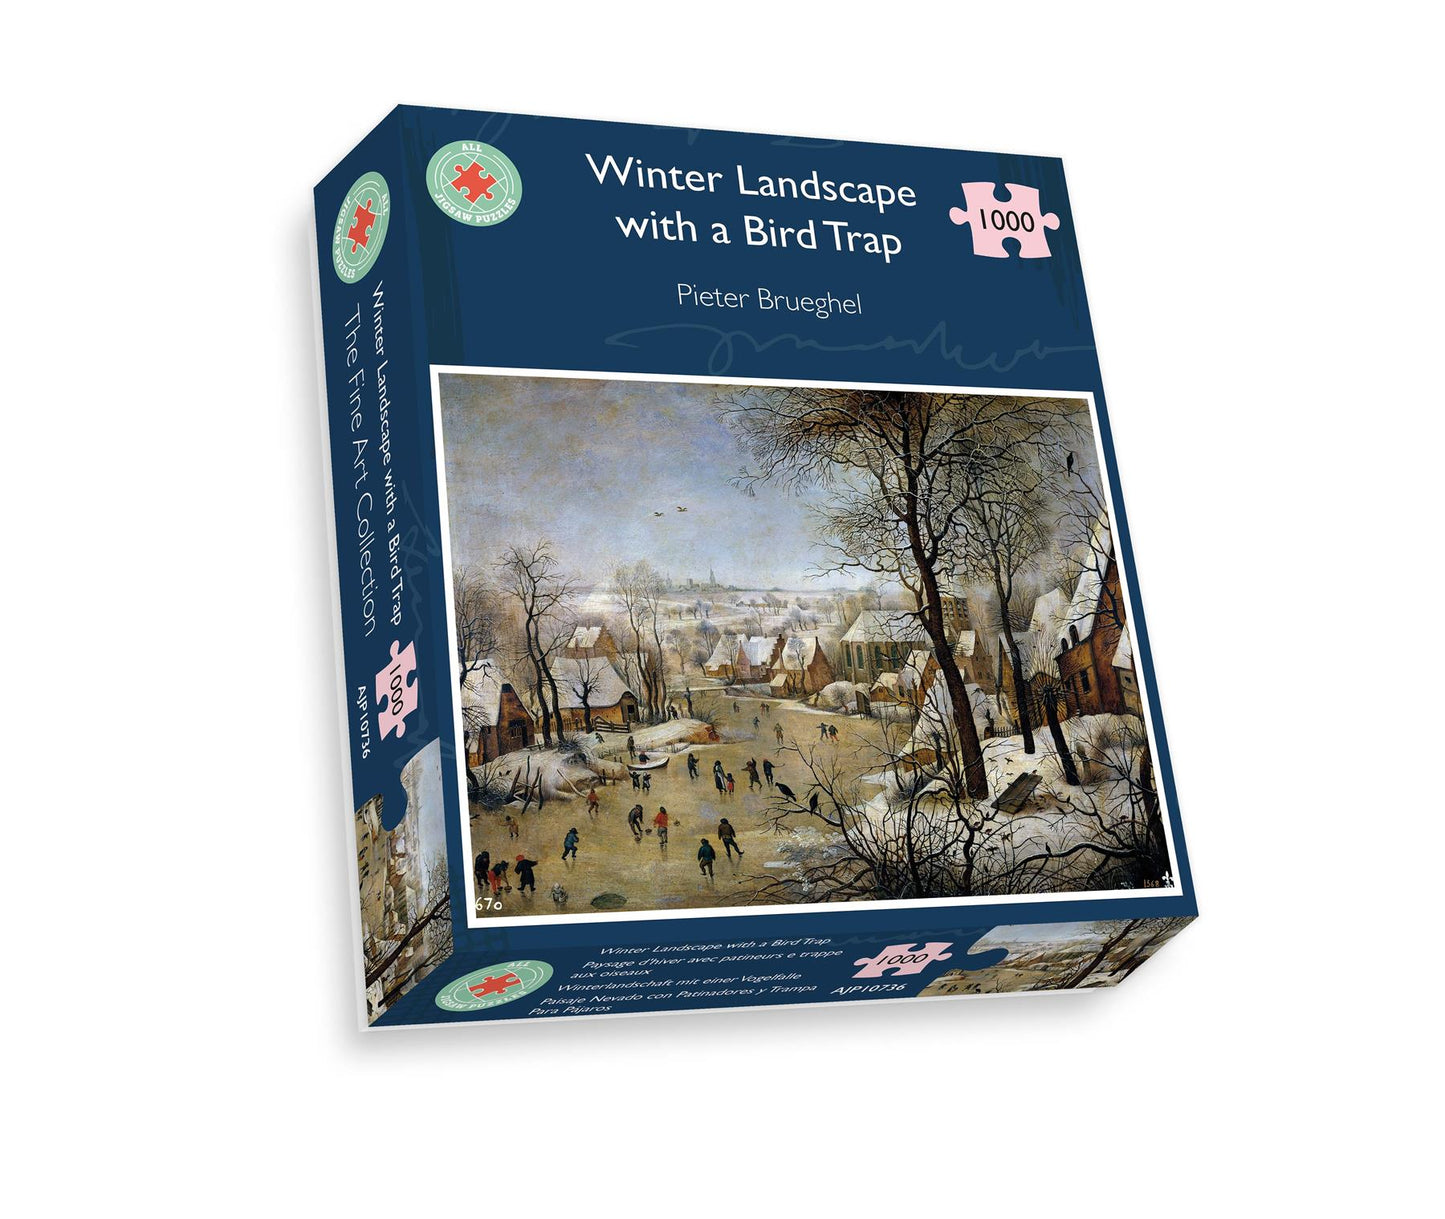 Winter Landscape with a Bird Trap - 1000 pc. jigsaw puzzle